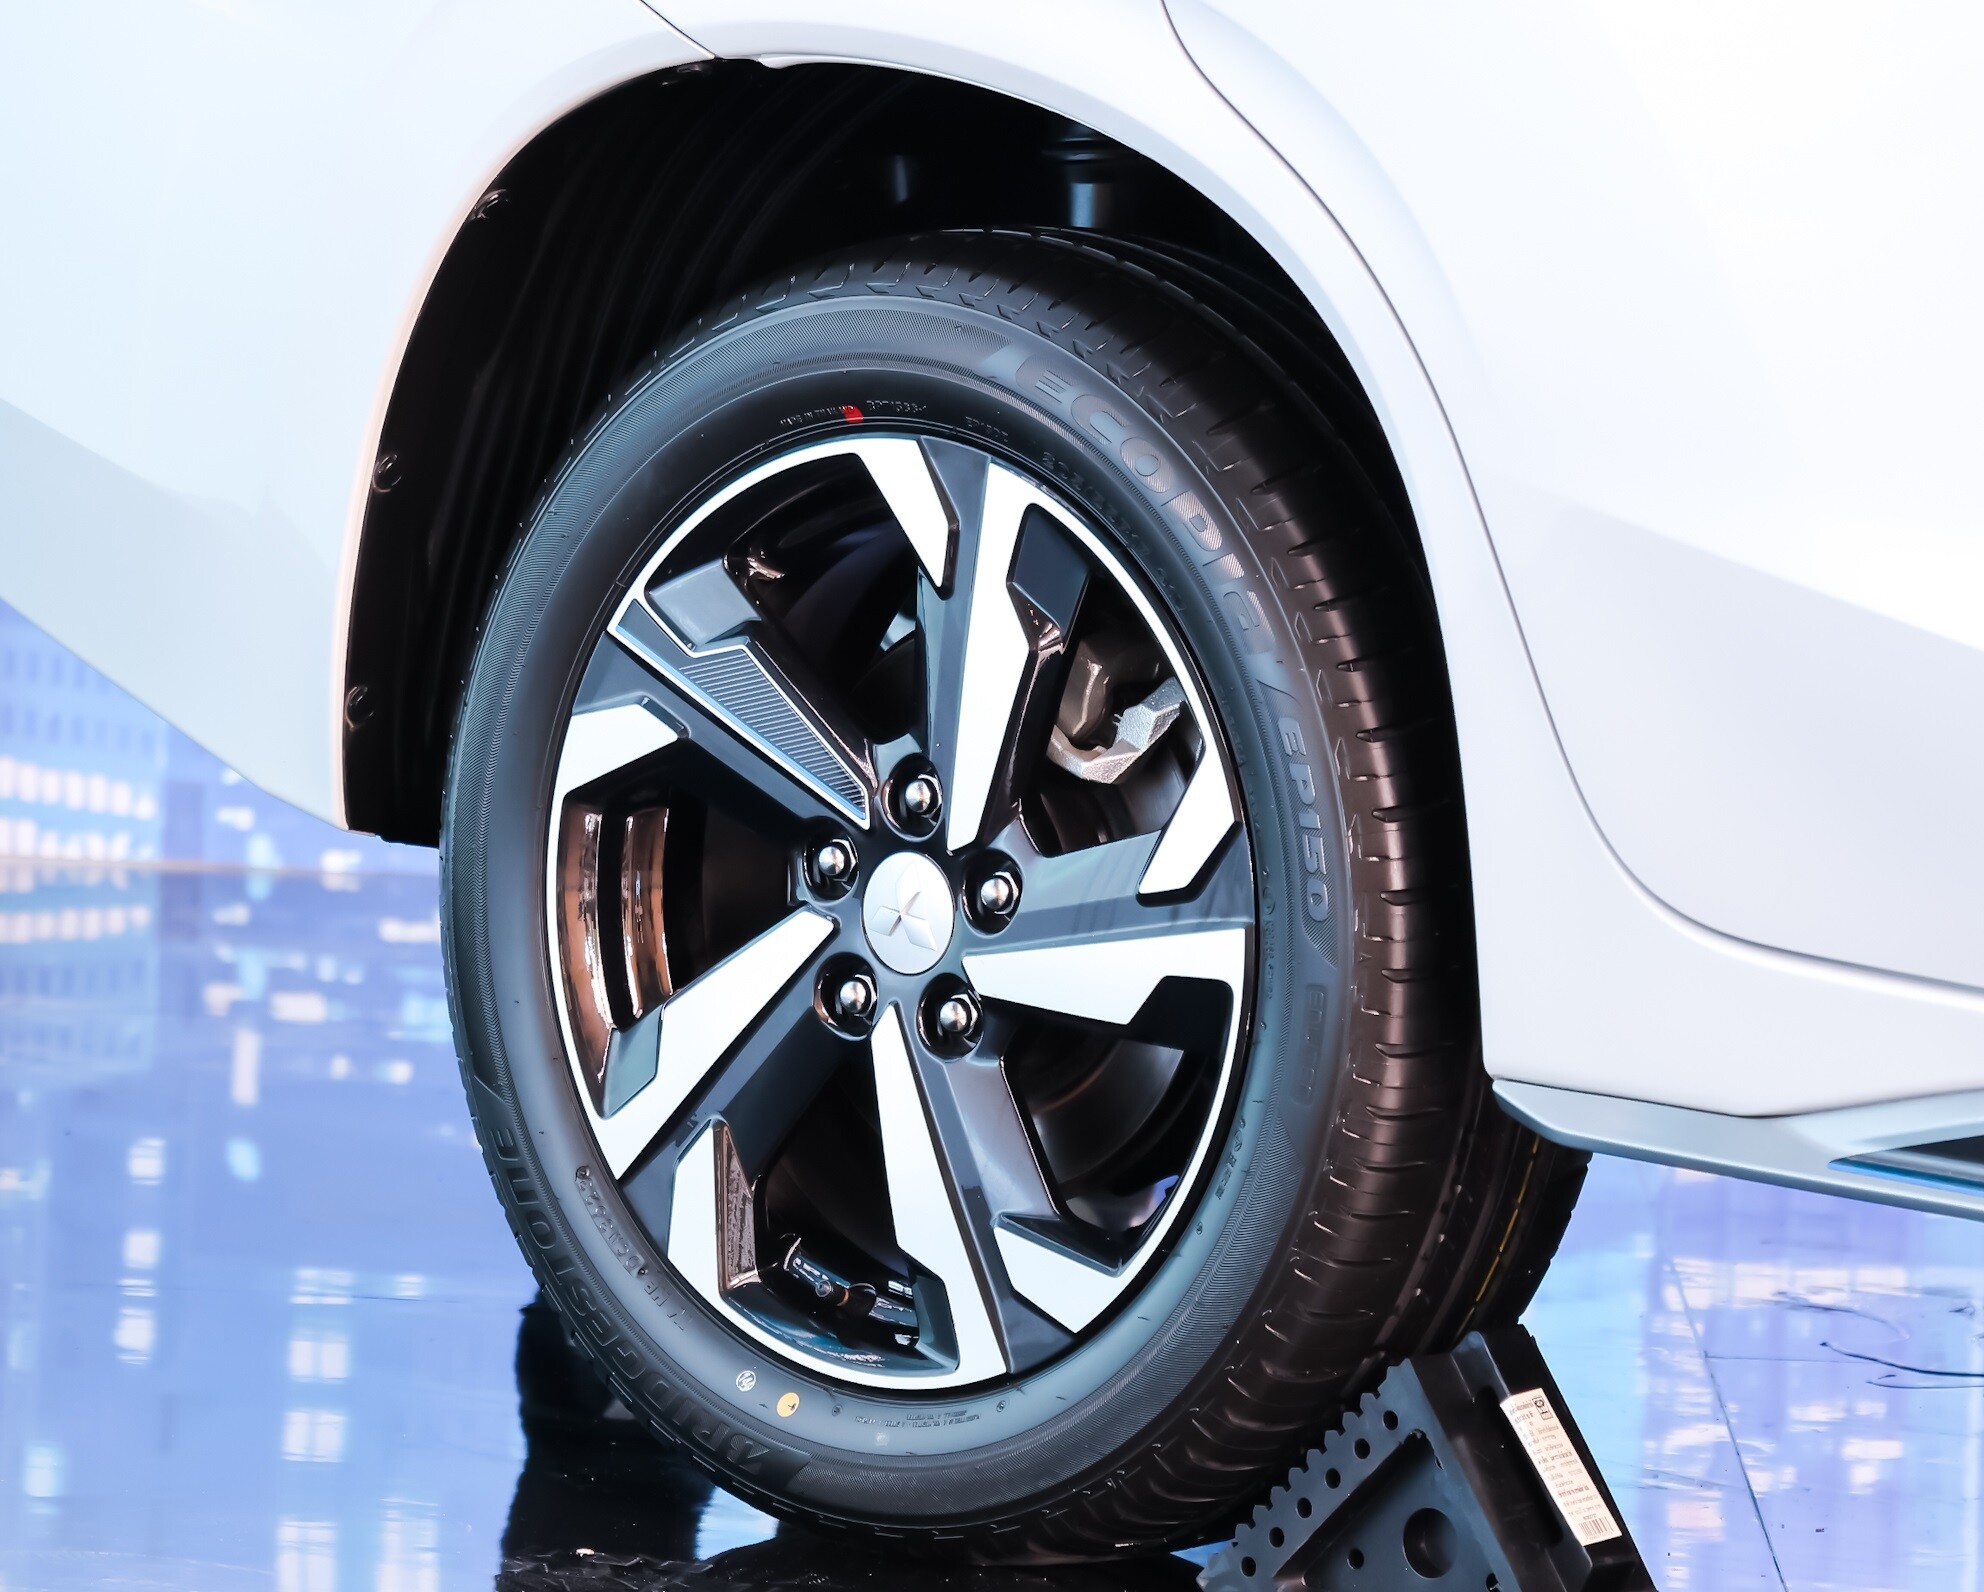 "BRIDGESTONE ECOPIA EP150 with the Ultimate Customization of Cutting-Edge ENLITEN(R) Technology" Selected as Original Equipment to Power "New Xpander HEV and New Xpander Cross HEV" from Mitsubishi Motors